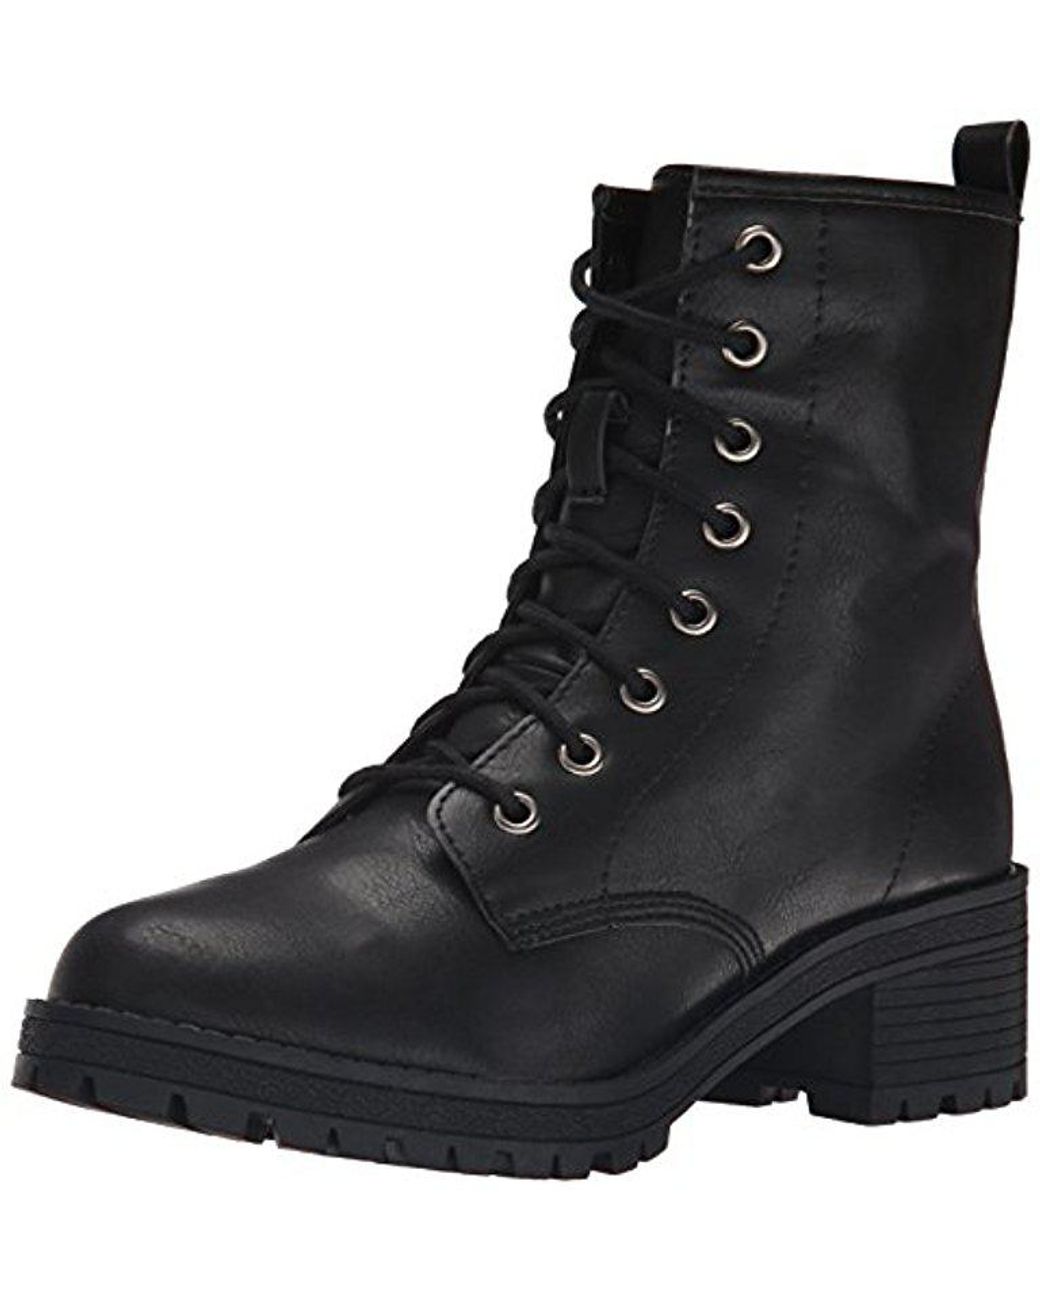 Madden Girl Eloisee Combat Boot in Black | Lyst